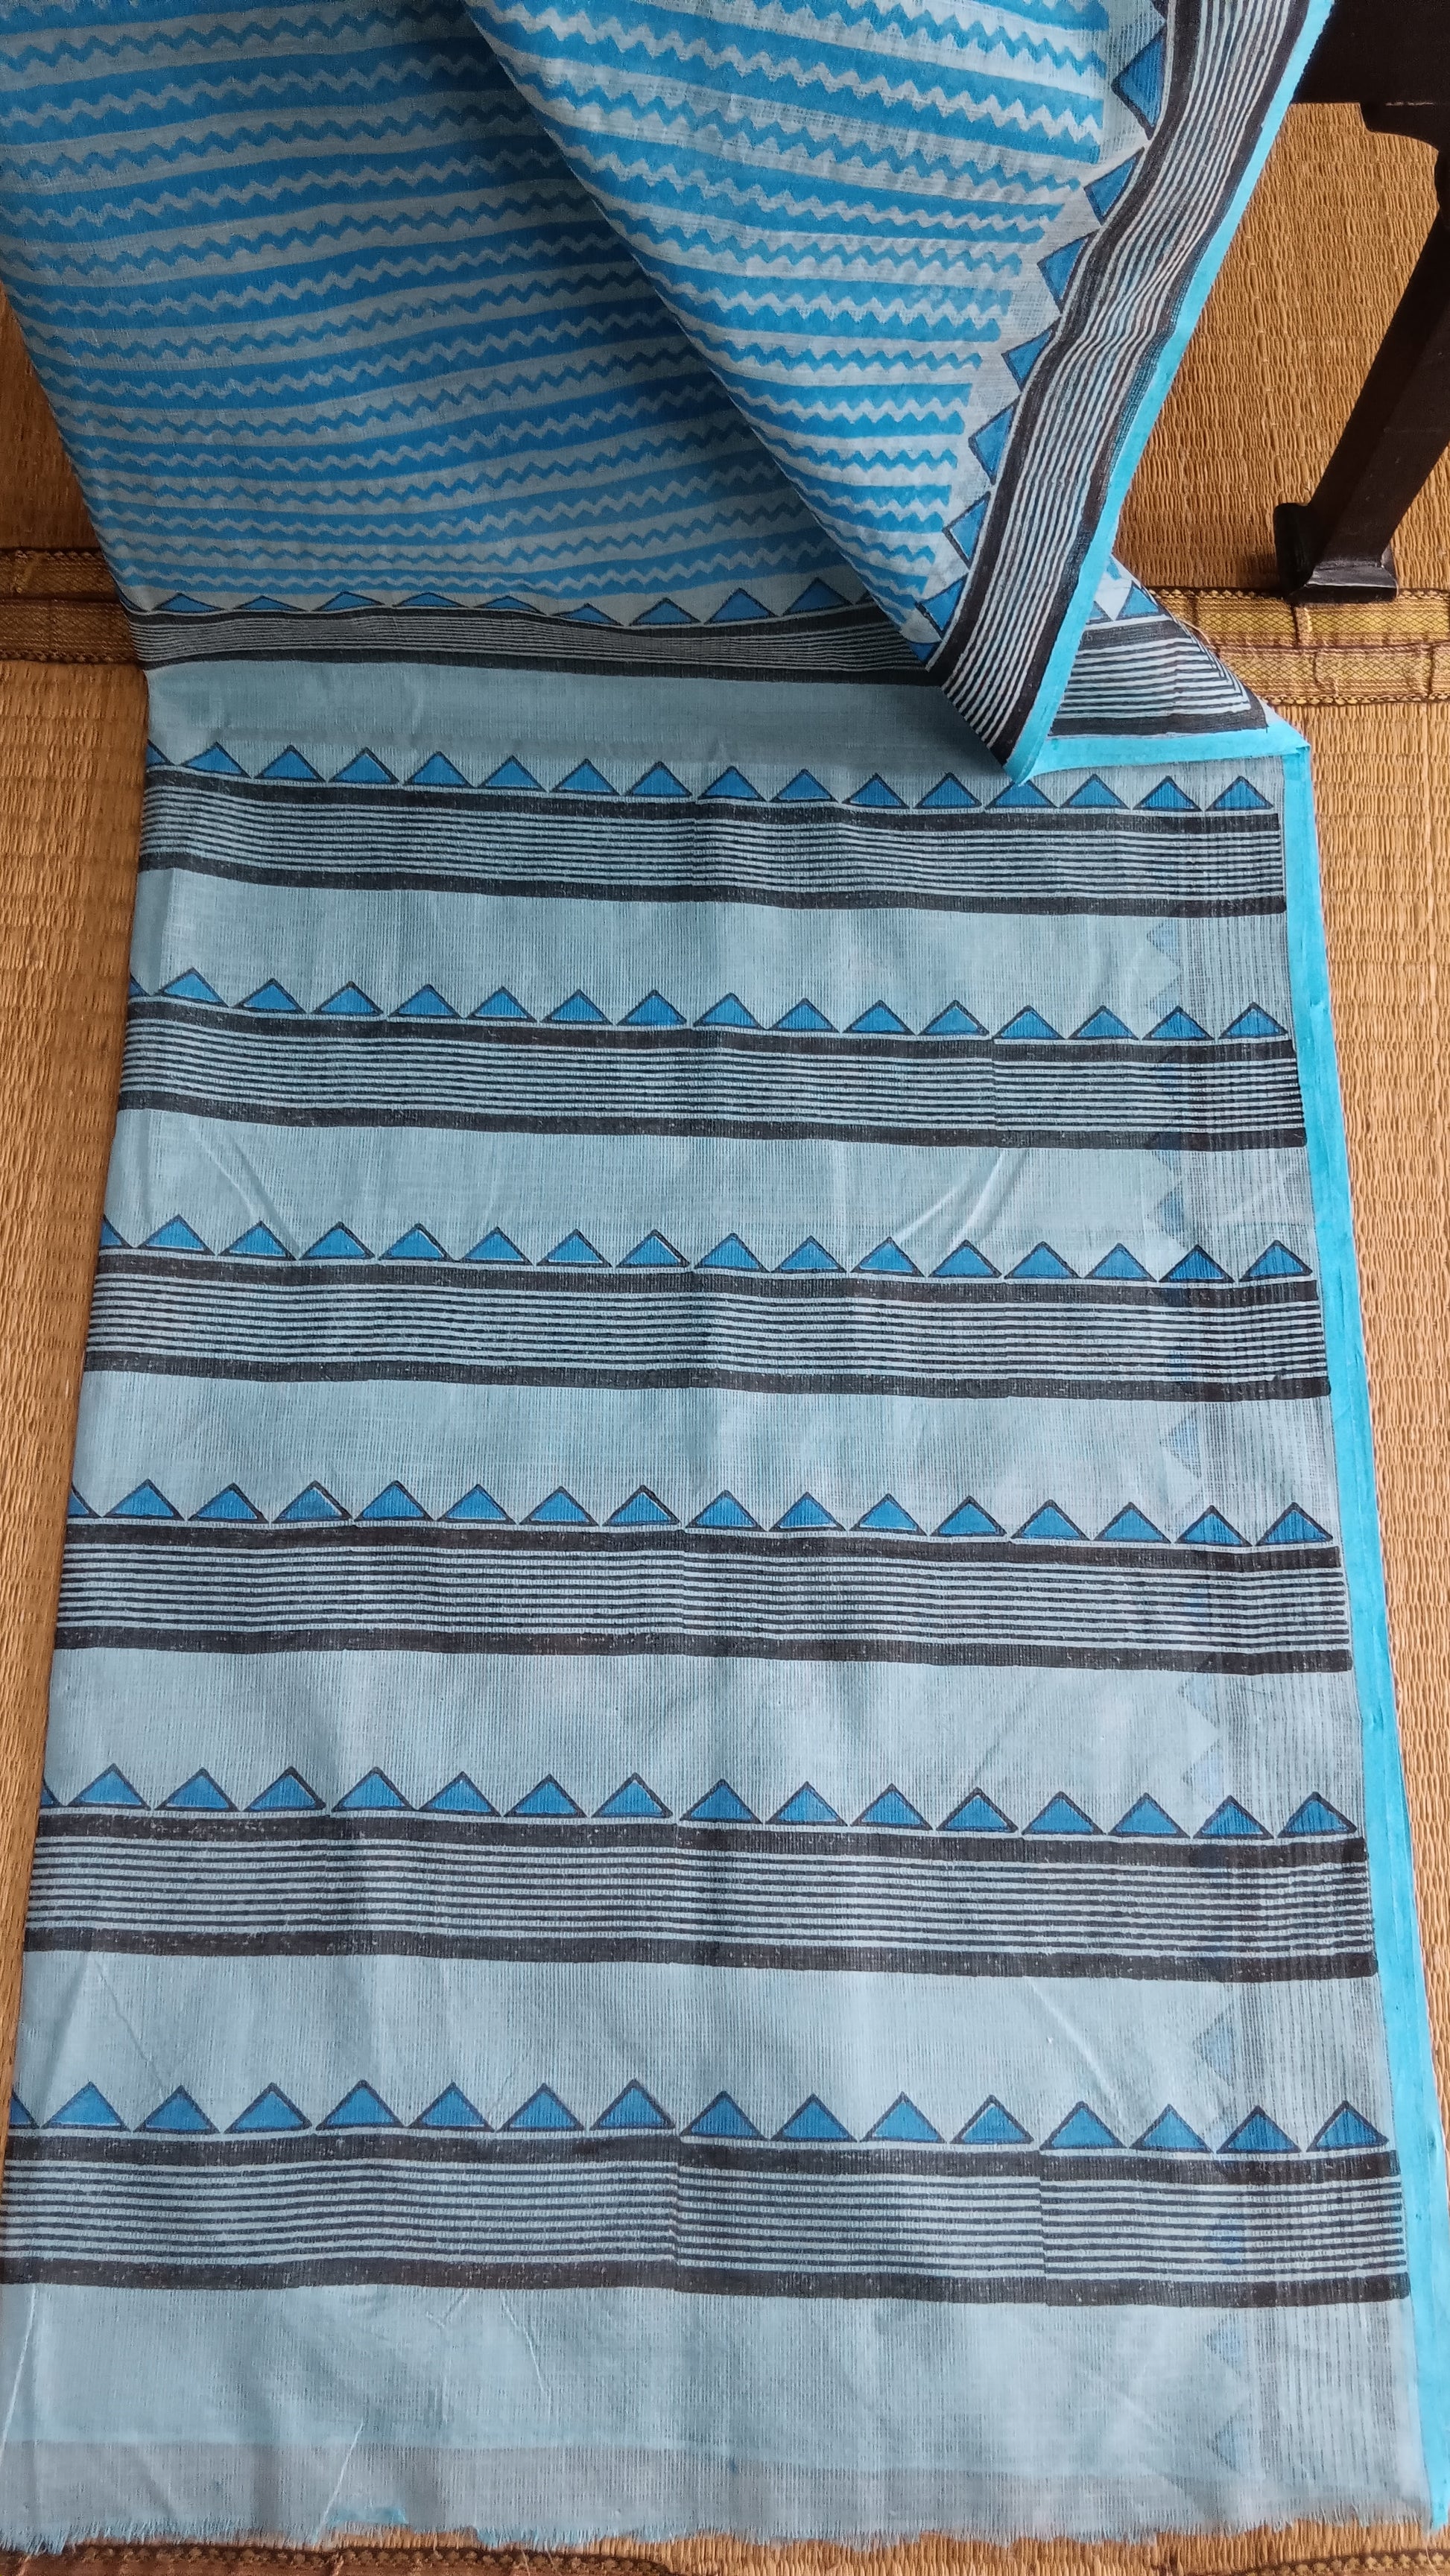 View from the top of the block printed pallu of a blue daily wear kota cotton saree